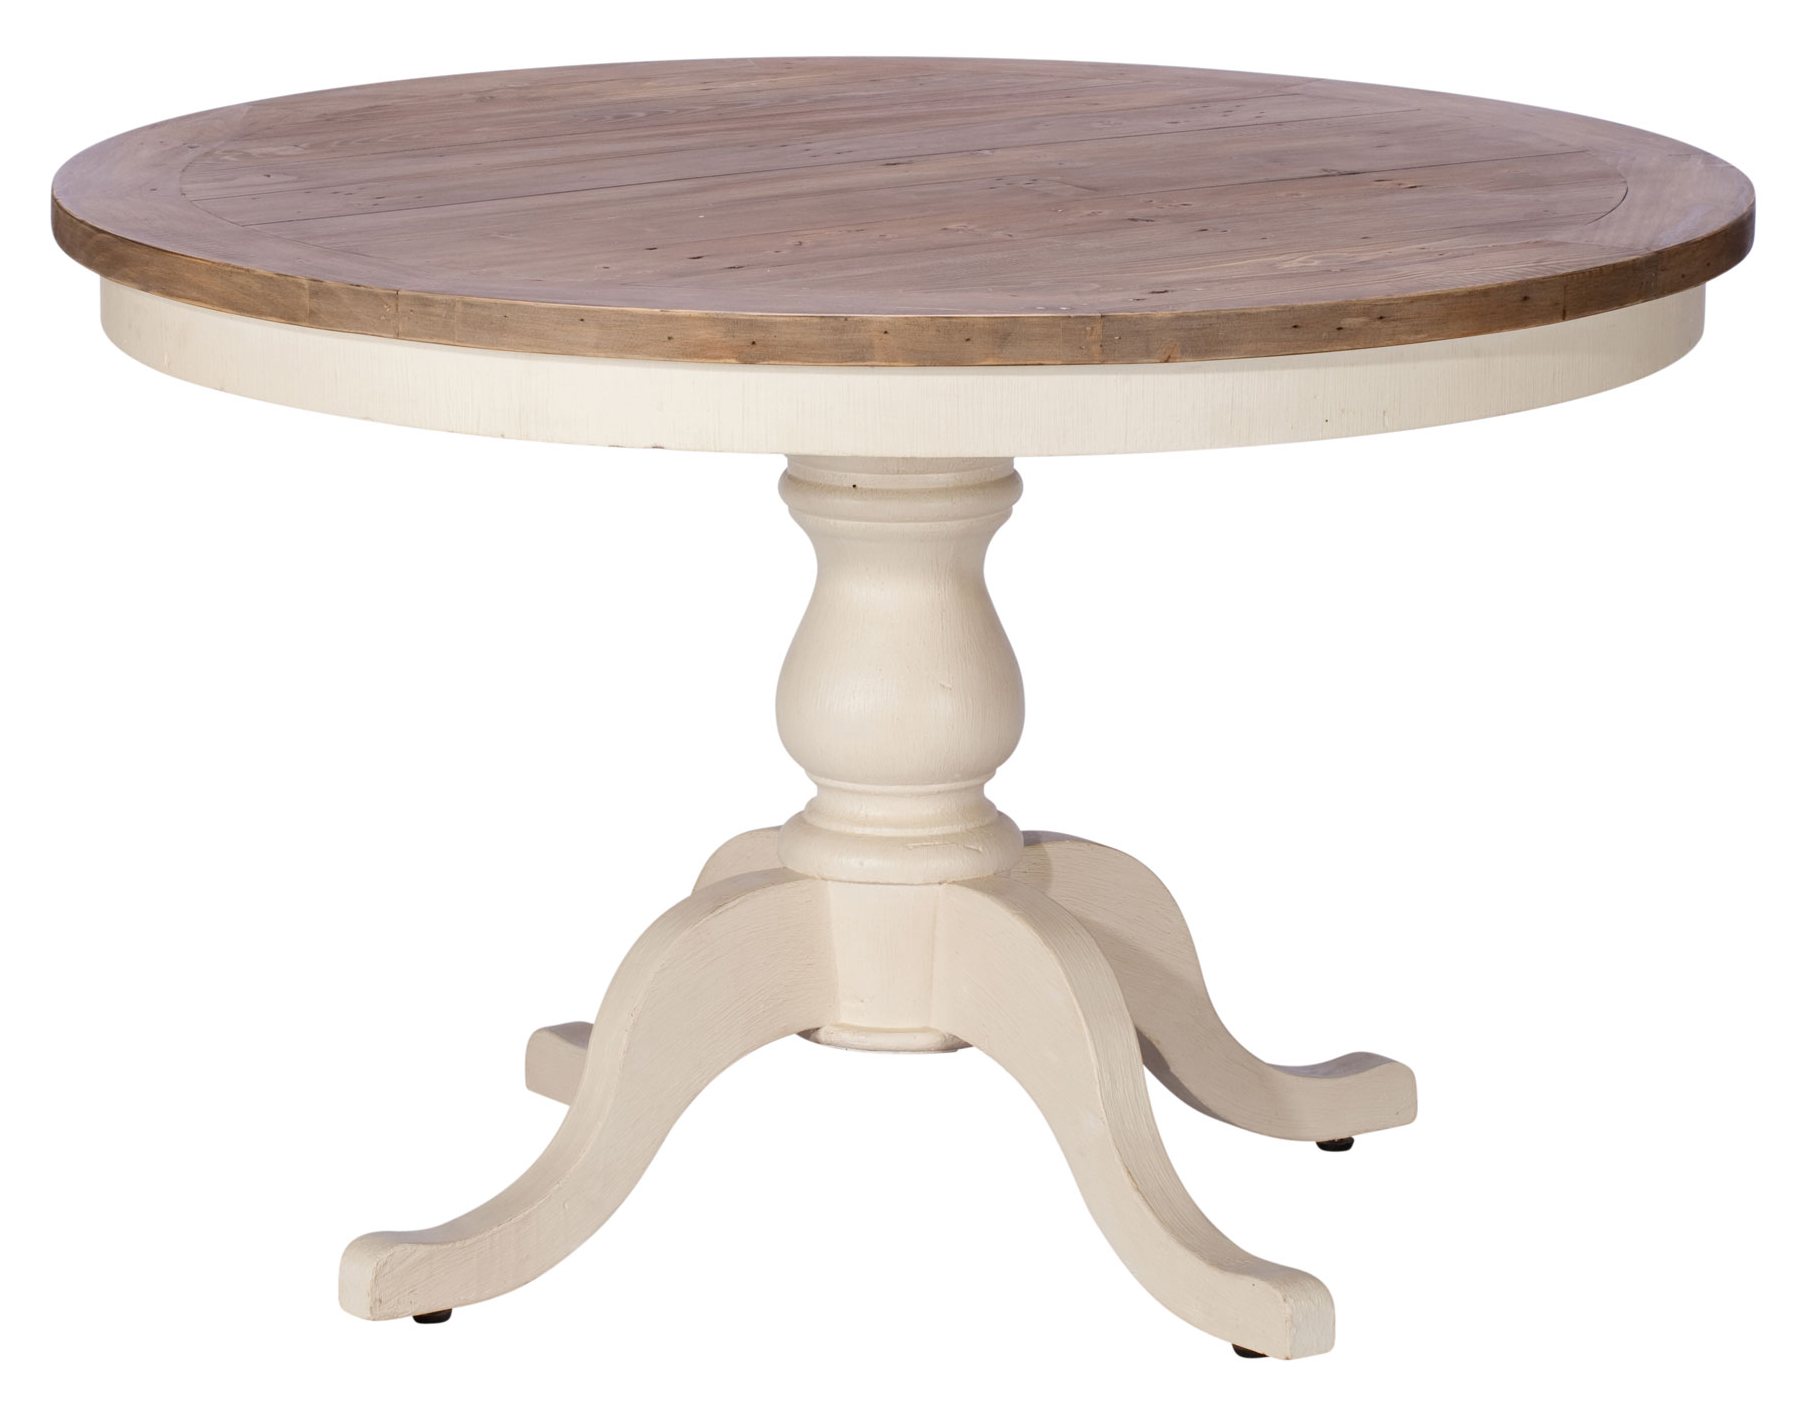 French Country Circular Dining Table - Dansk